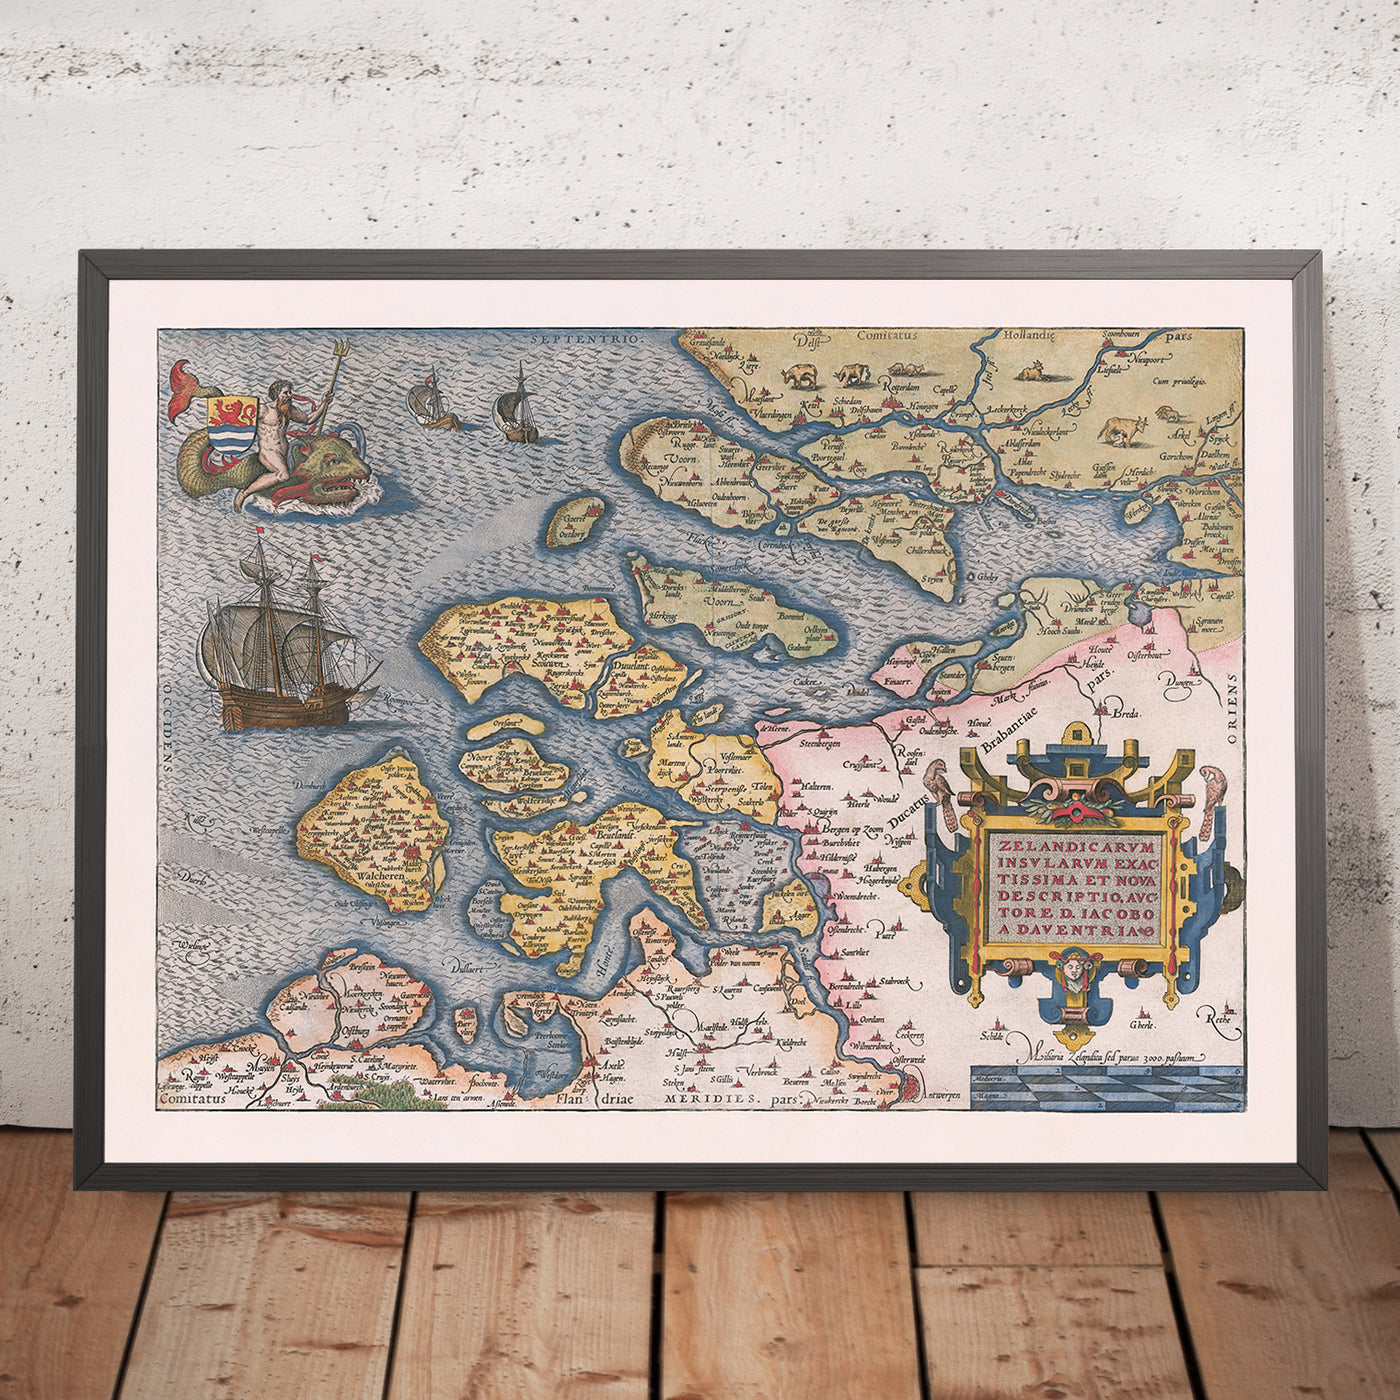 Old Map of Zeeland by Ortelius, 1584: Rotterdam, Antwerp, Delft, Triton, Sailing Ships